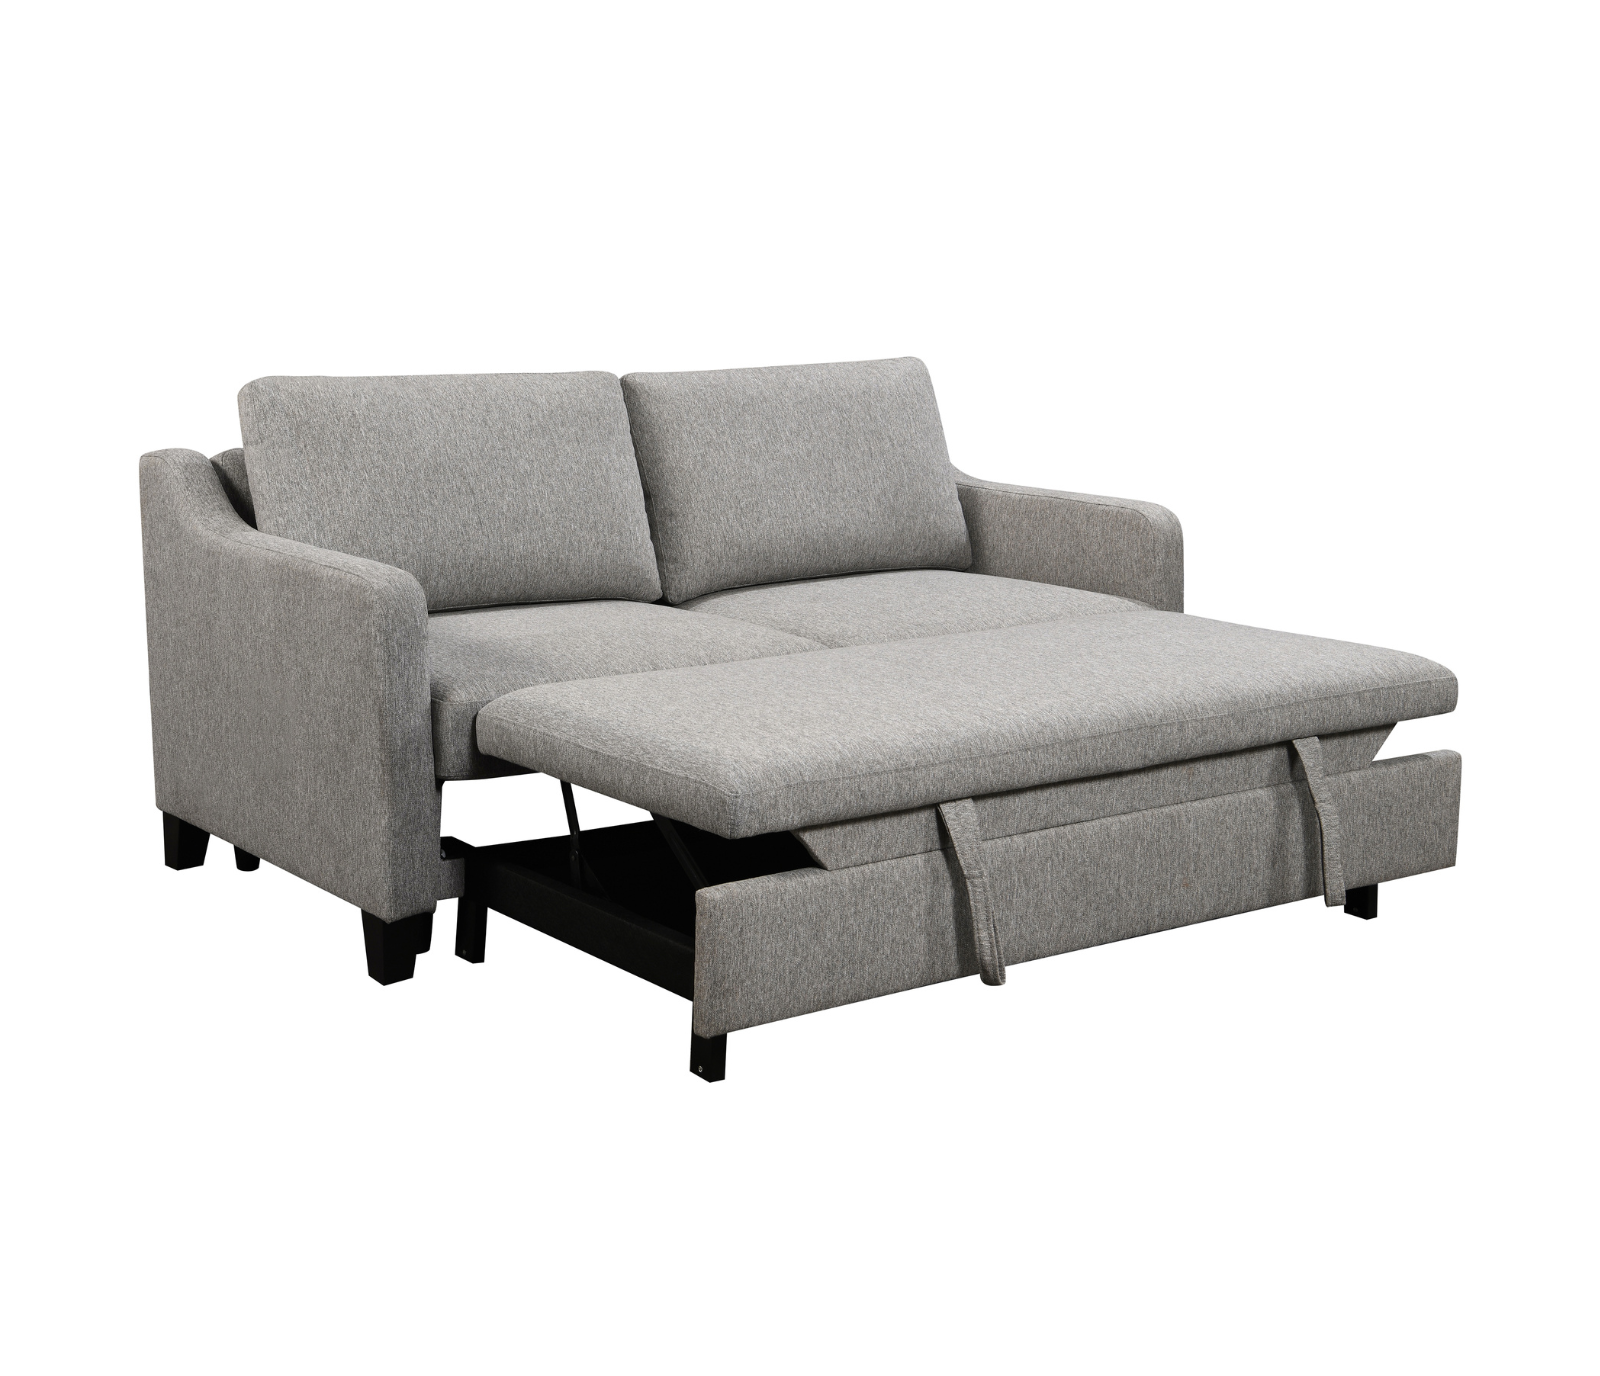 Lima Sofa w/ Pull-Out Sleeper - Oyster Grey Fabric